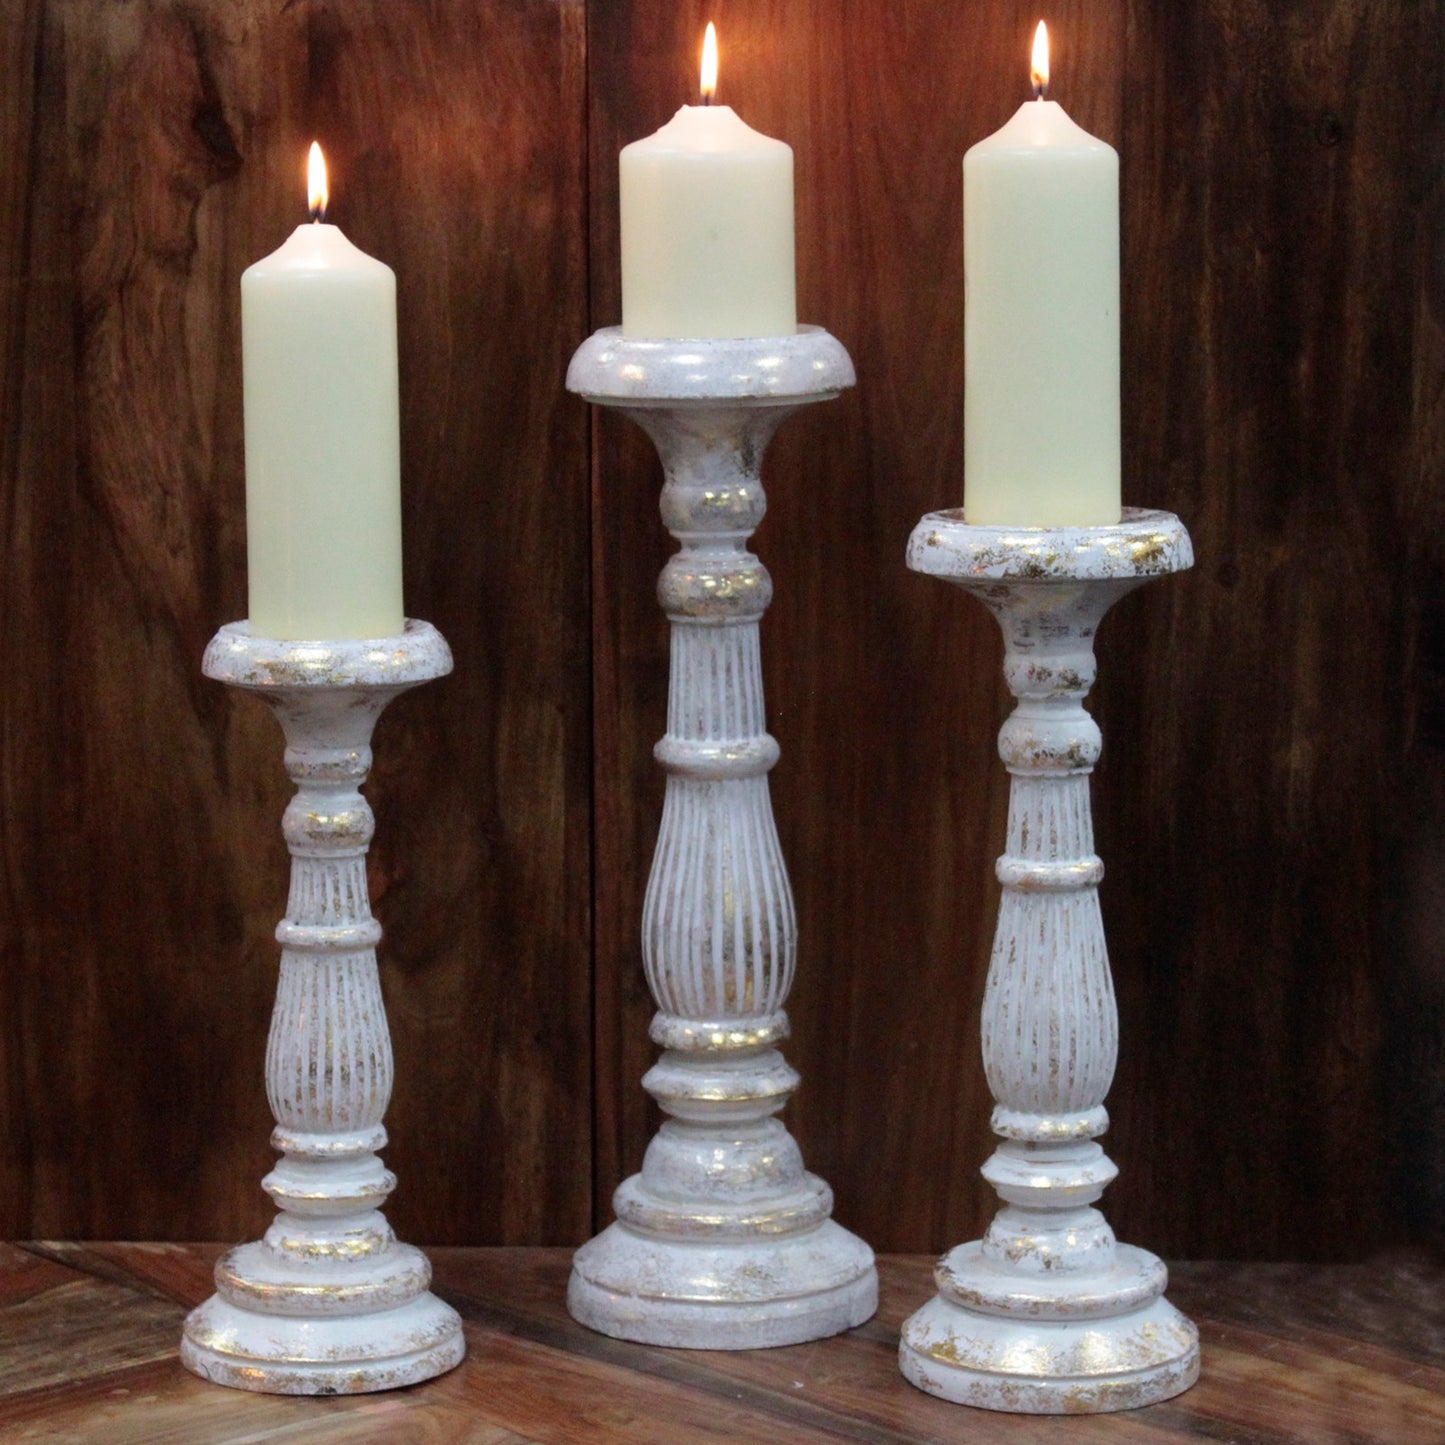 Medium Candle Stand - White Gold